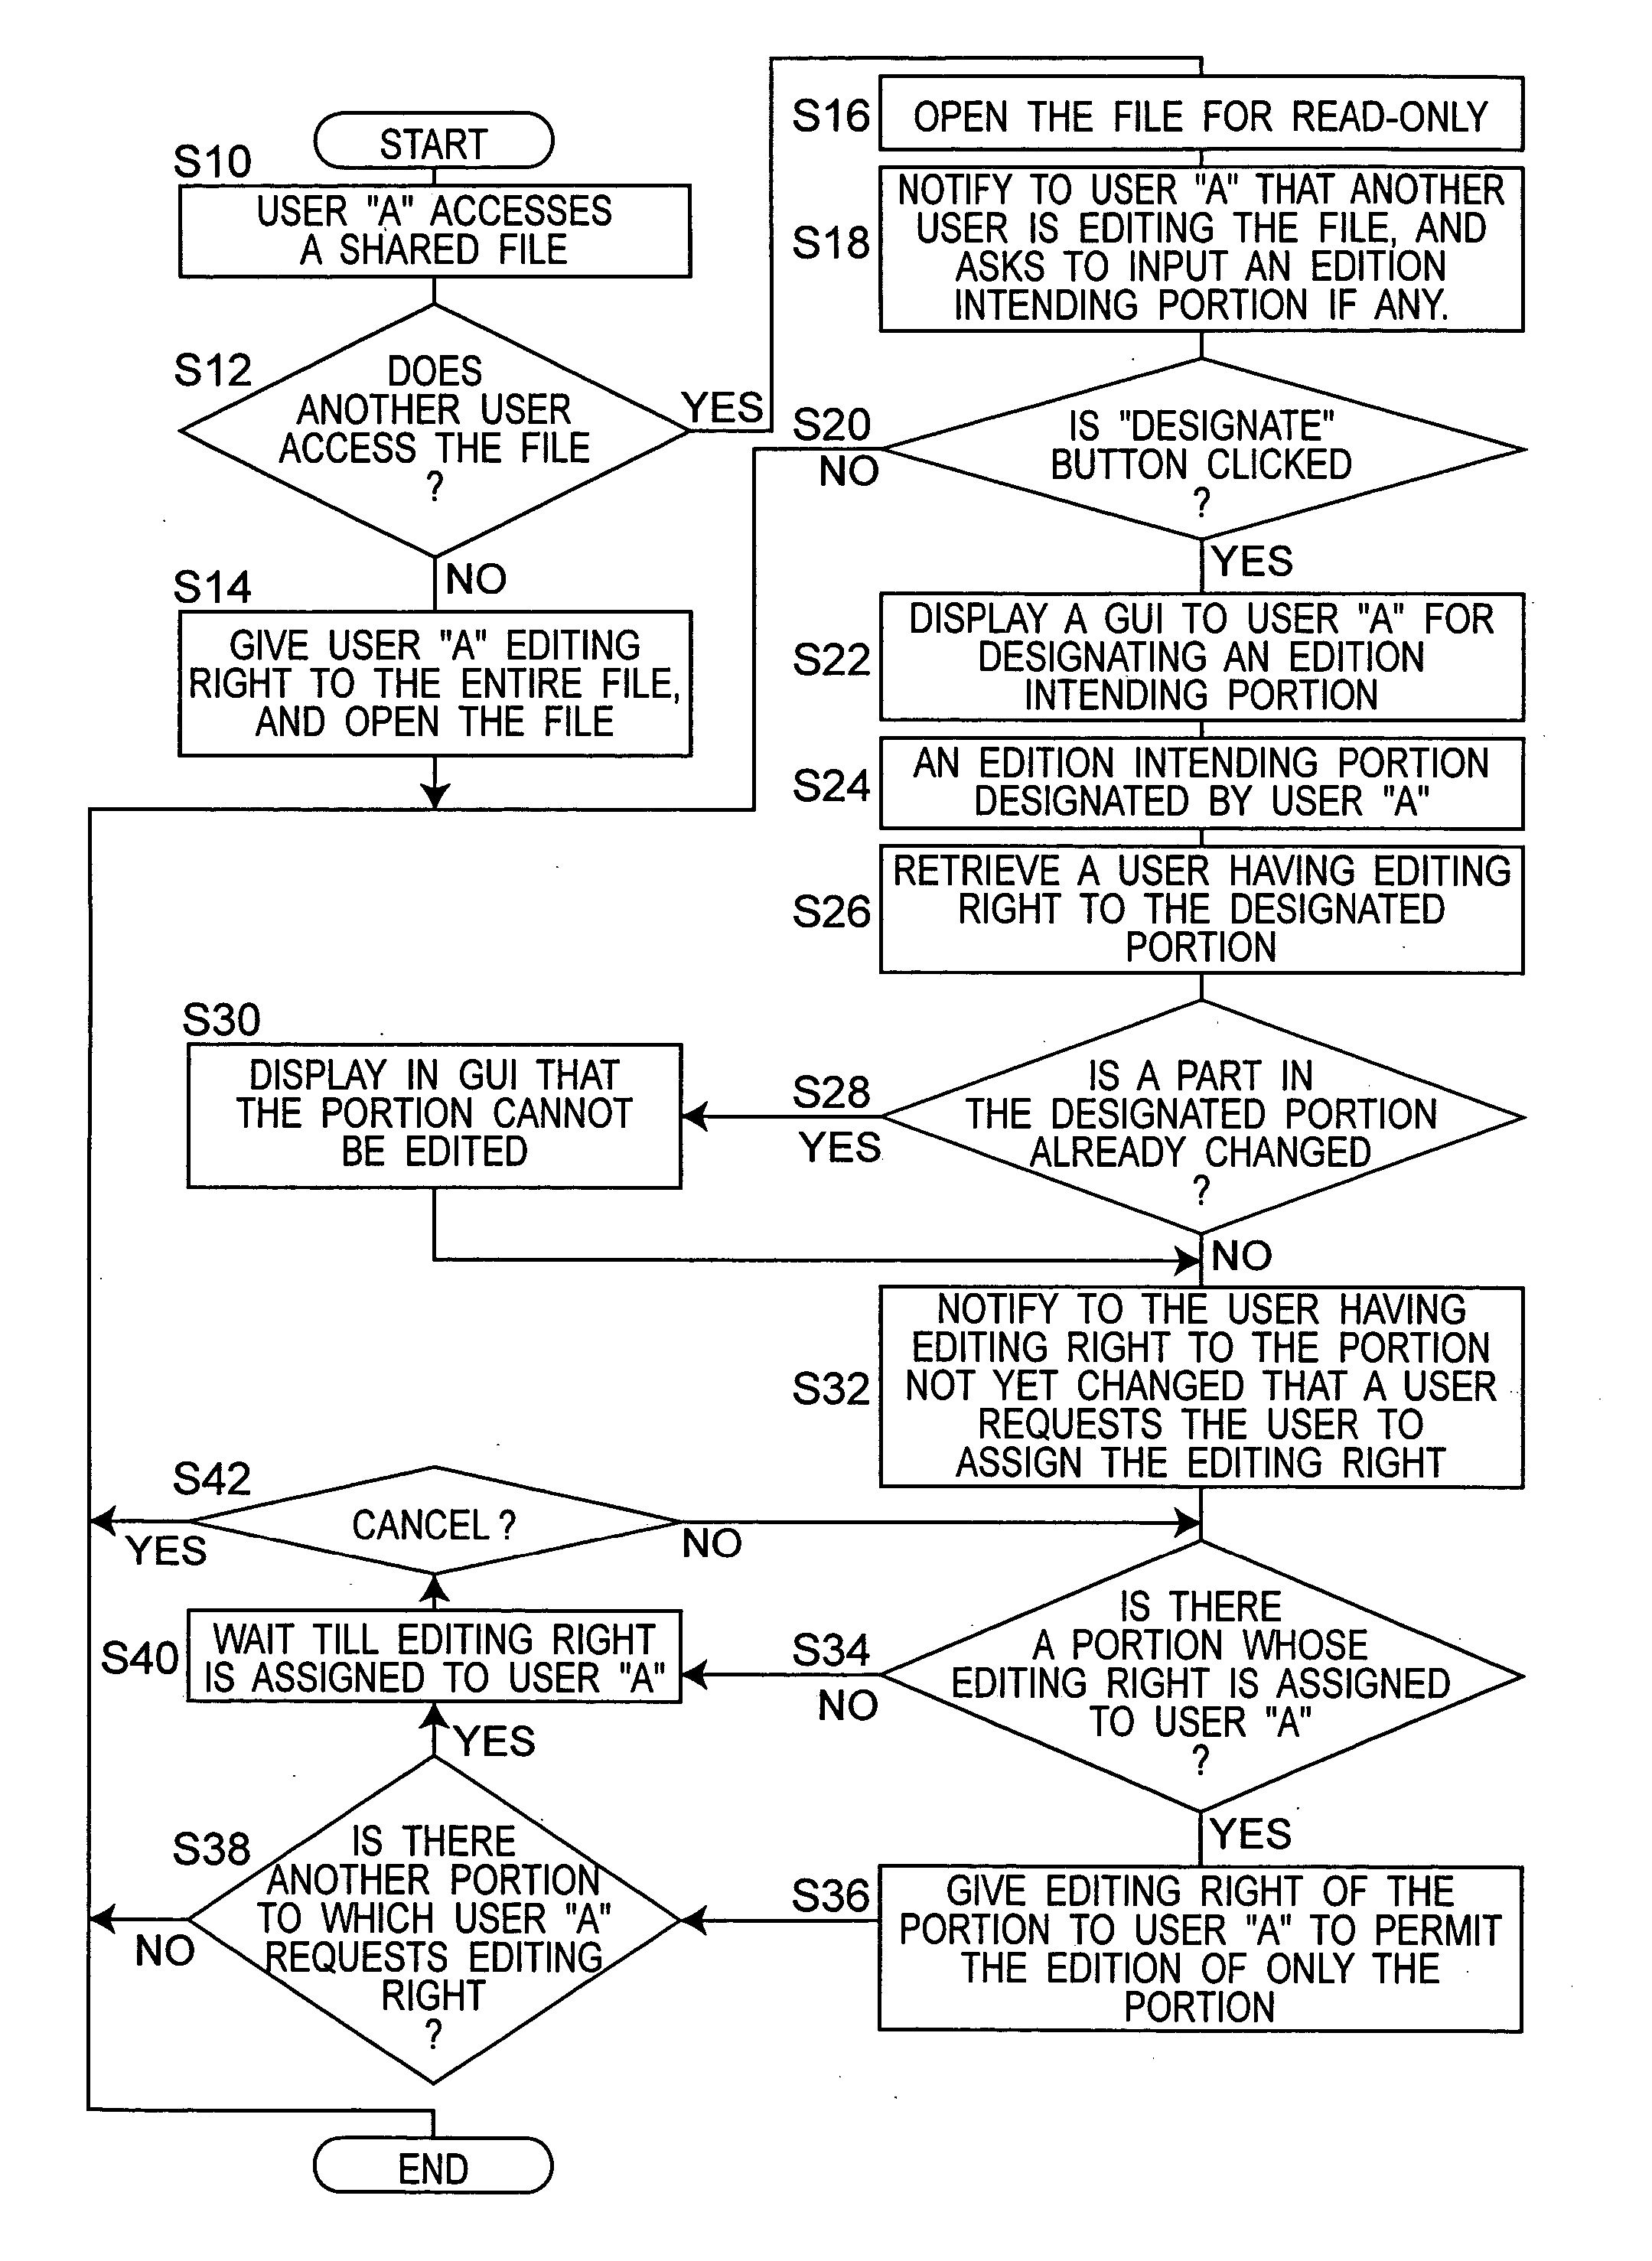 System and server for managing shared files